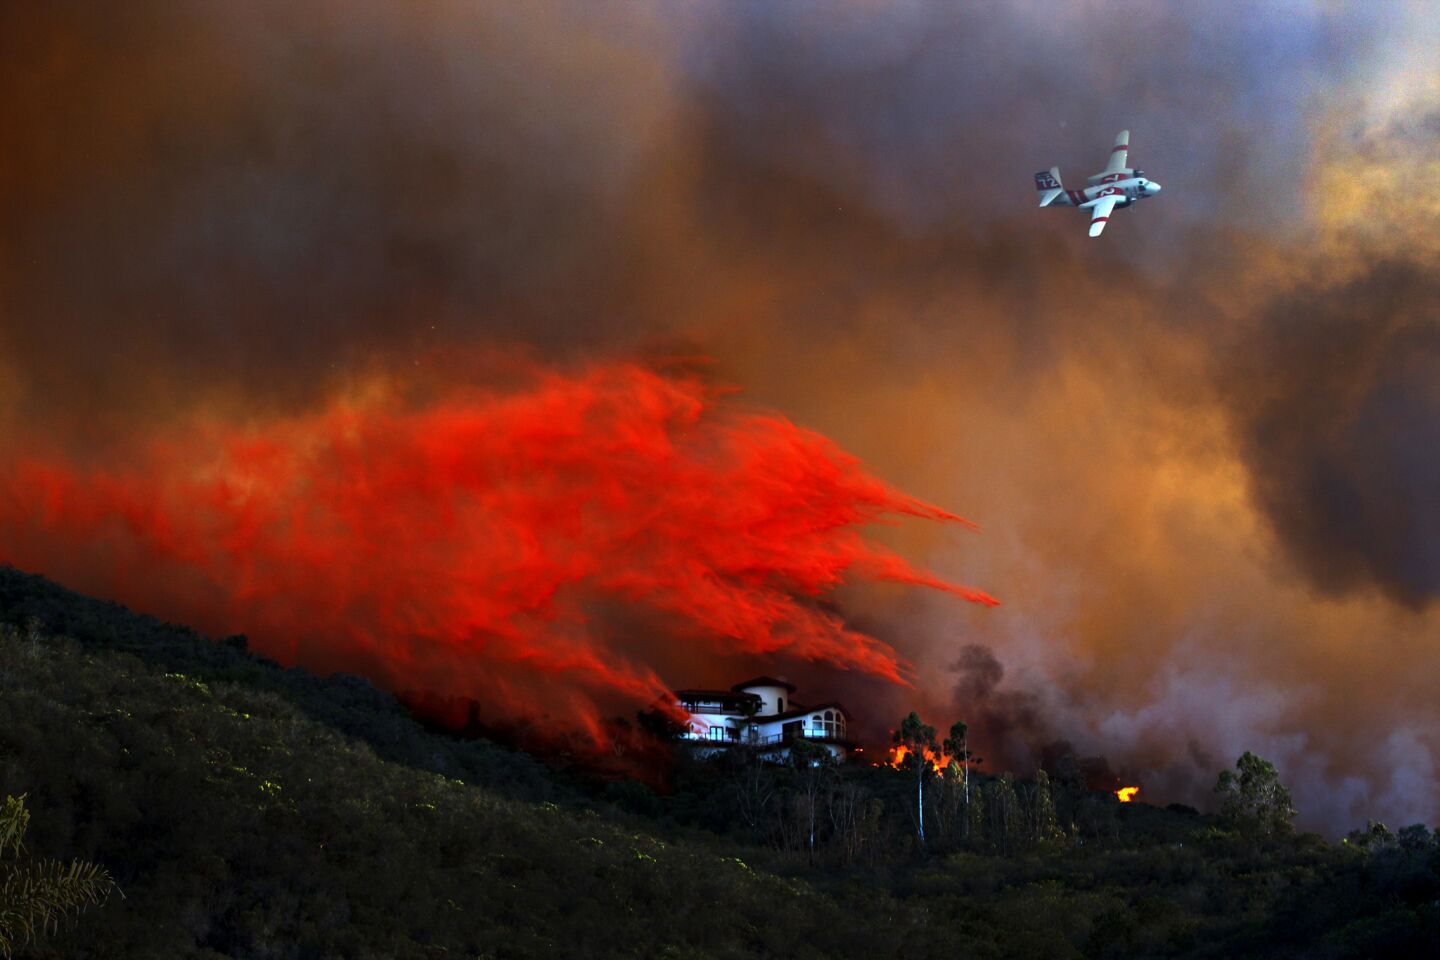 An airplane makes a fire retardant drop around a large Coronado Hills home in the San Marcos area.